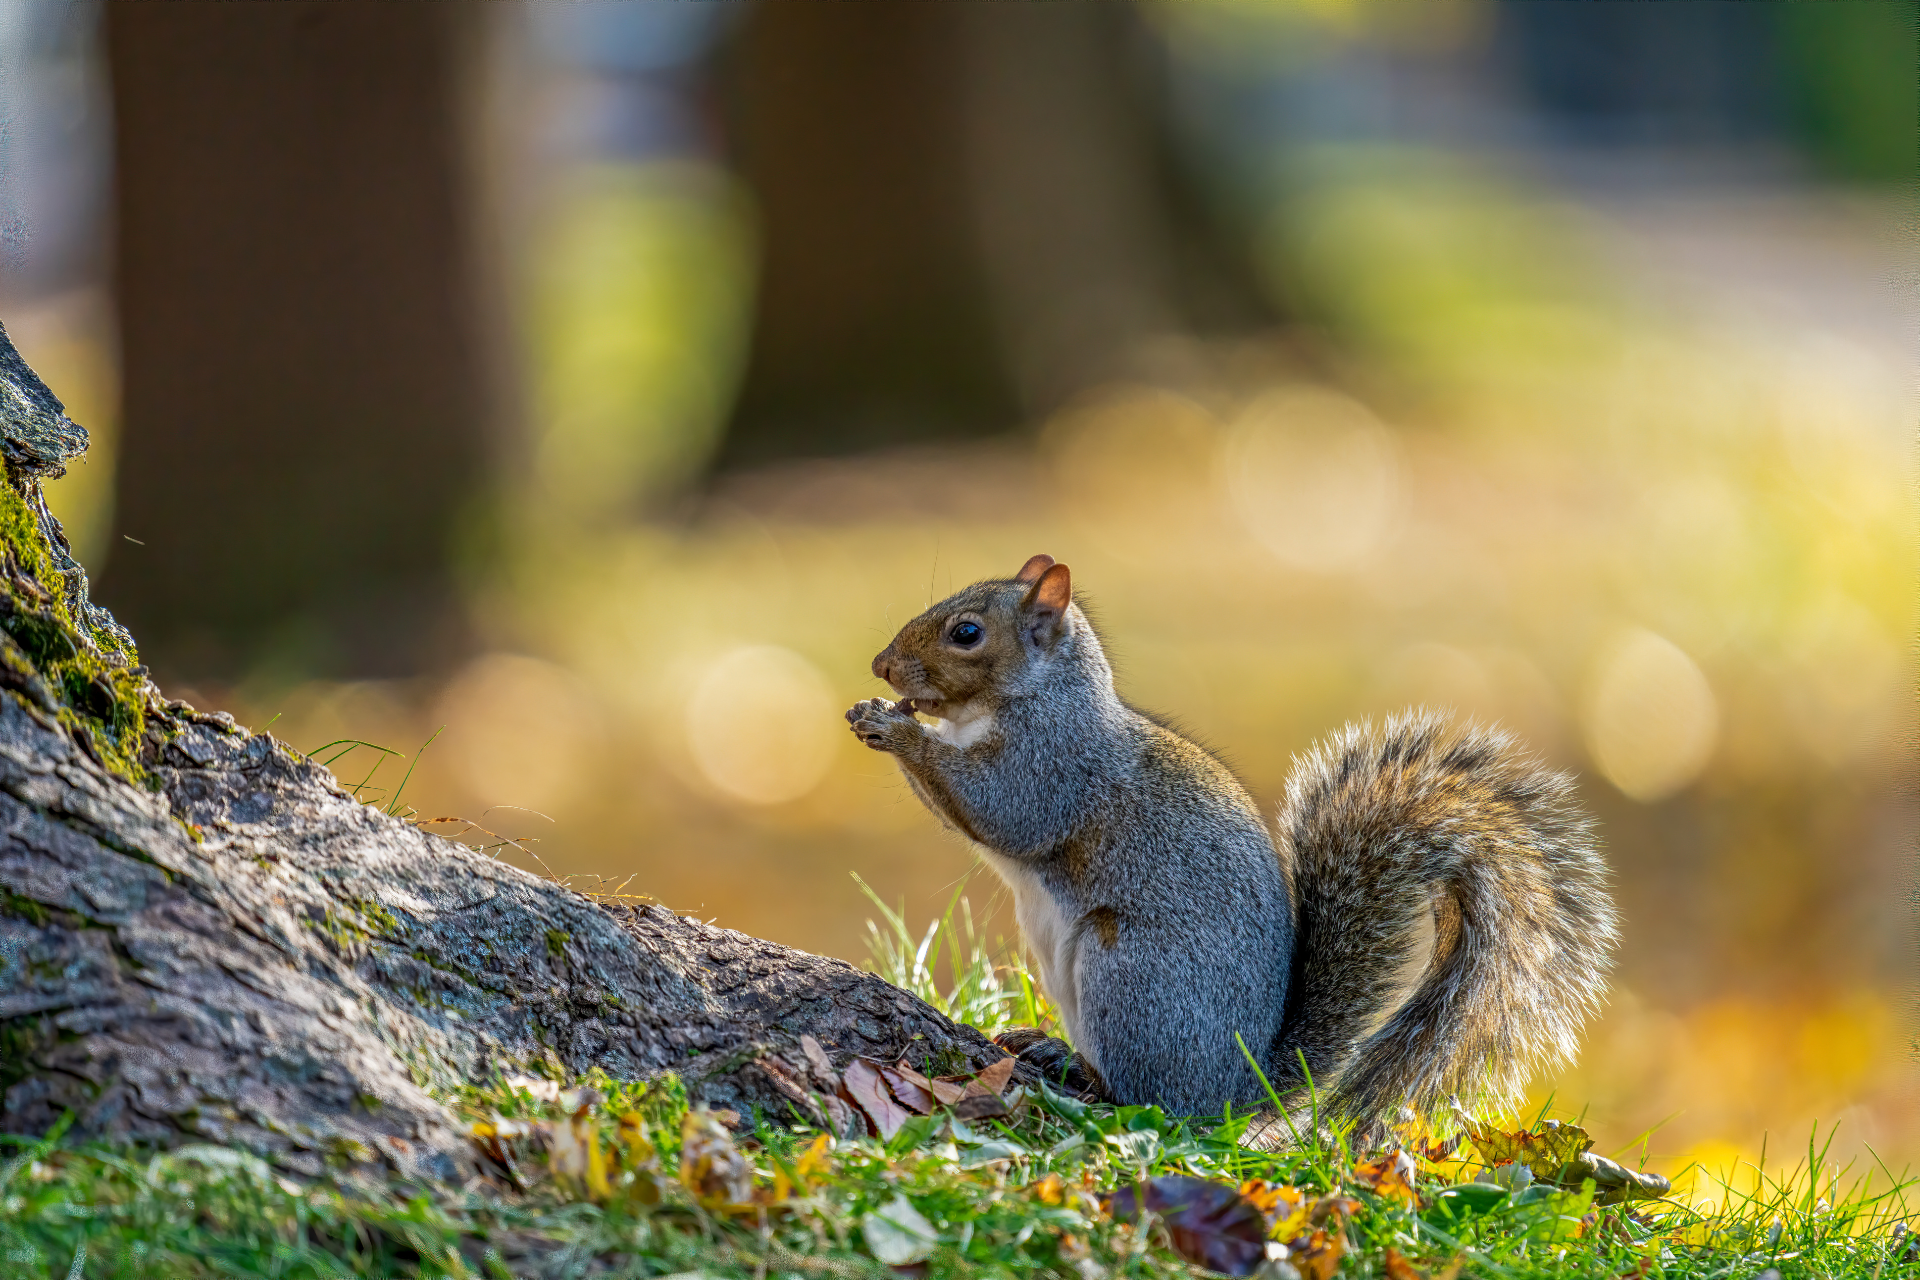 A squirrel is sitting on a tree stump in the grass eating a nut.